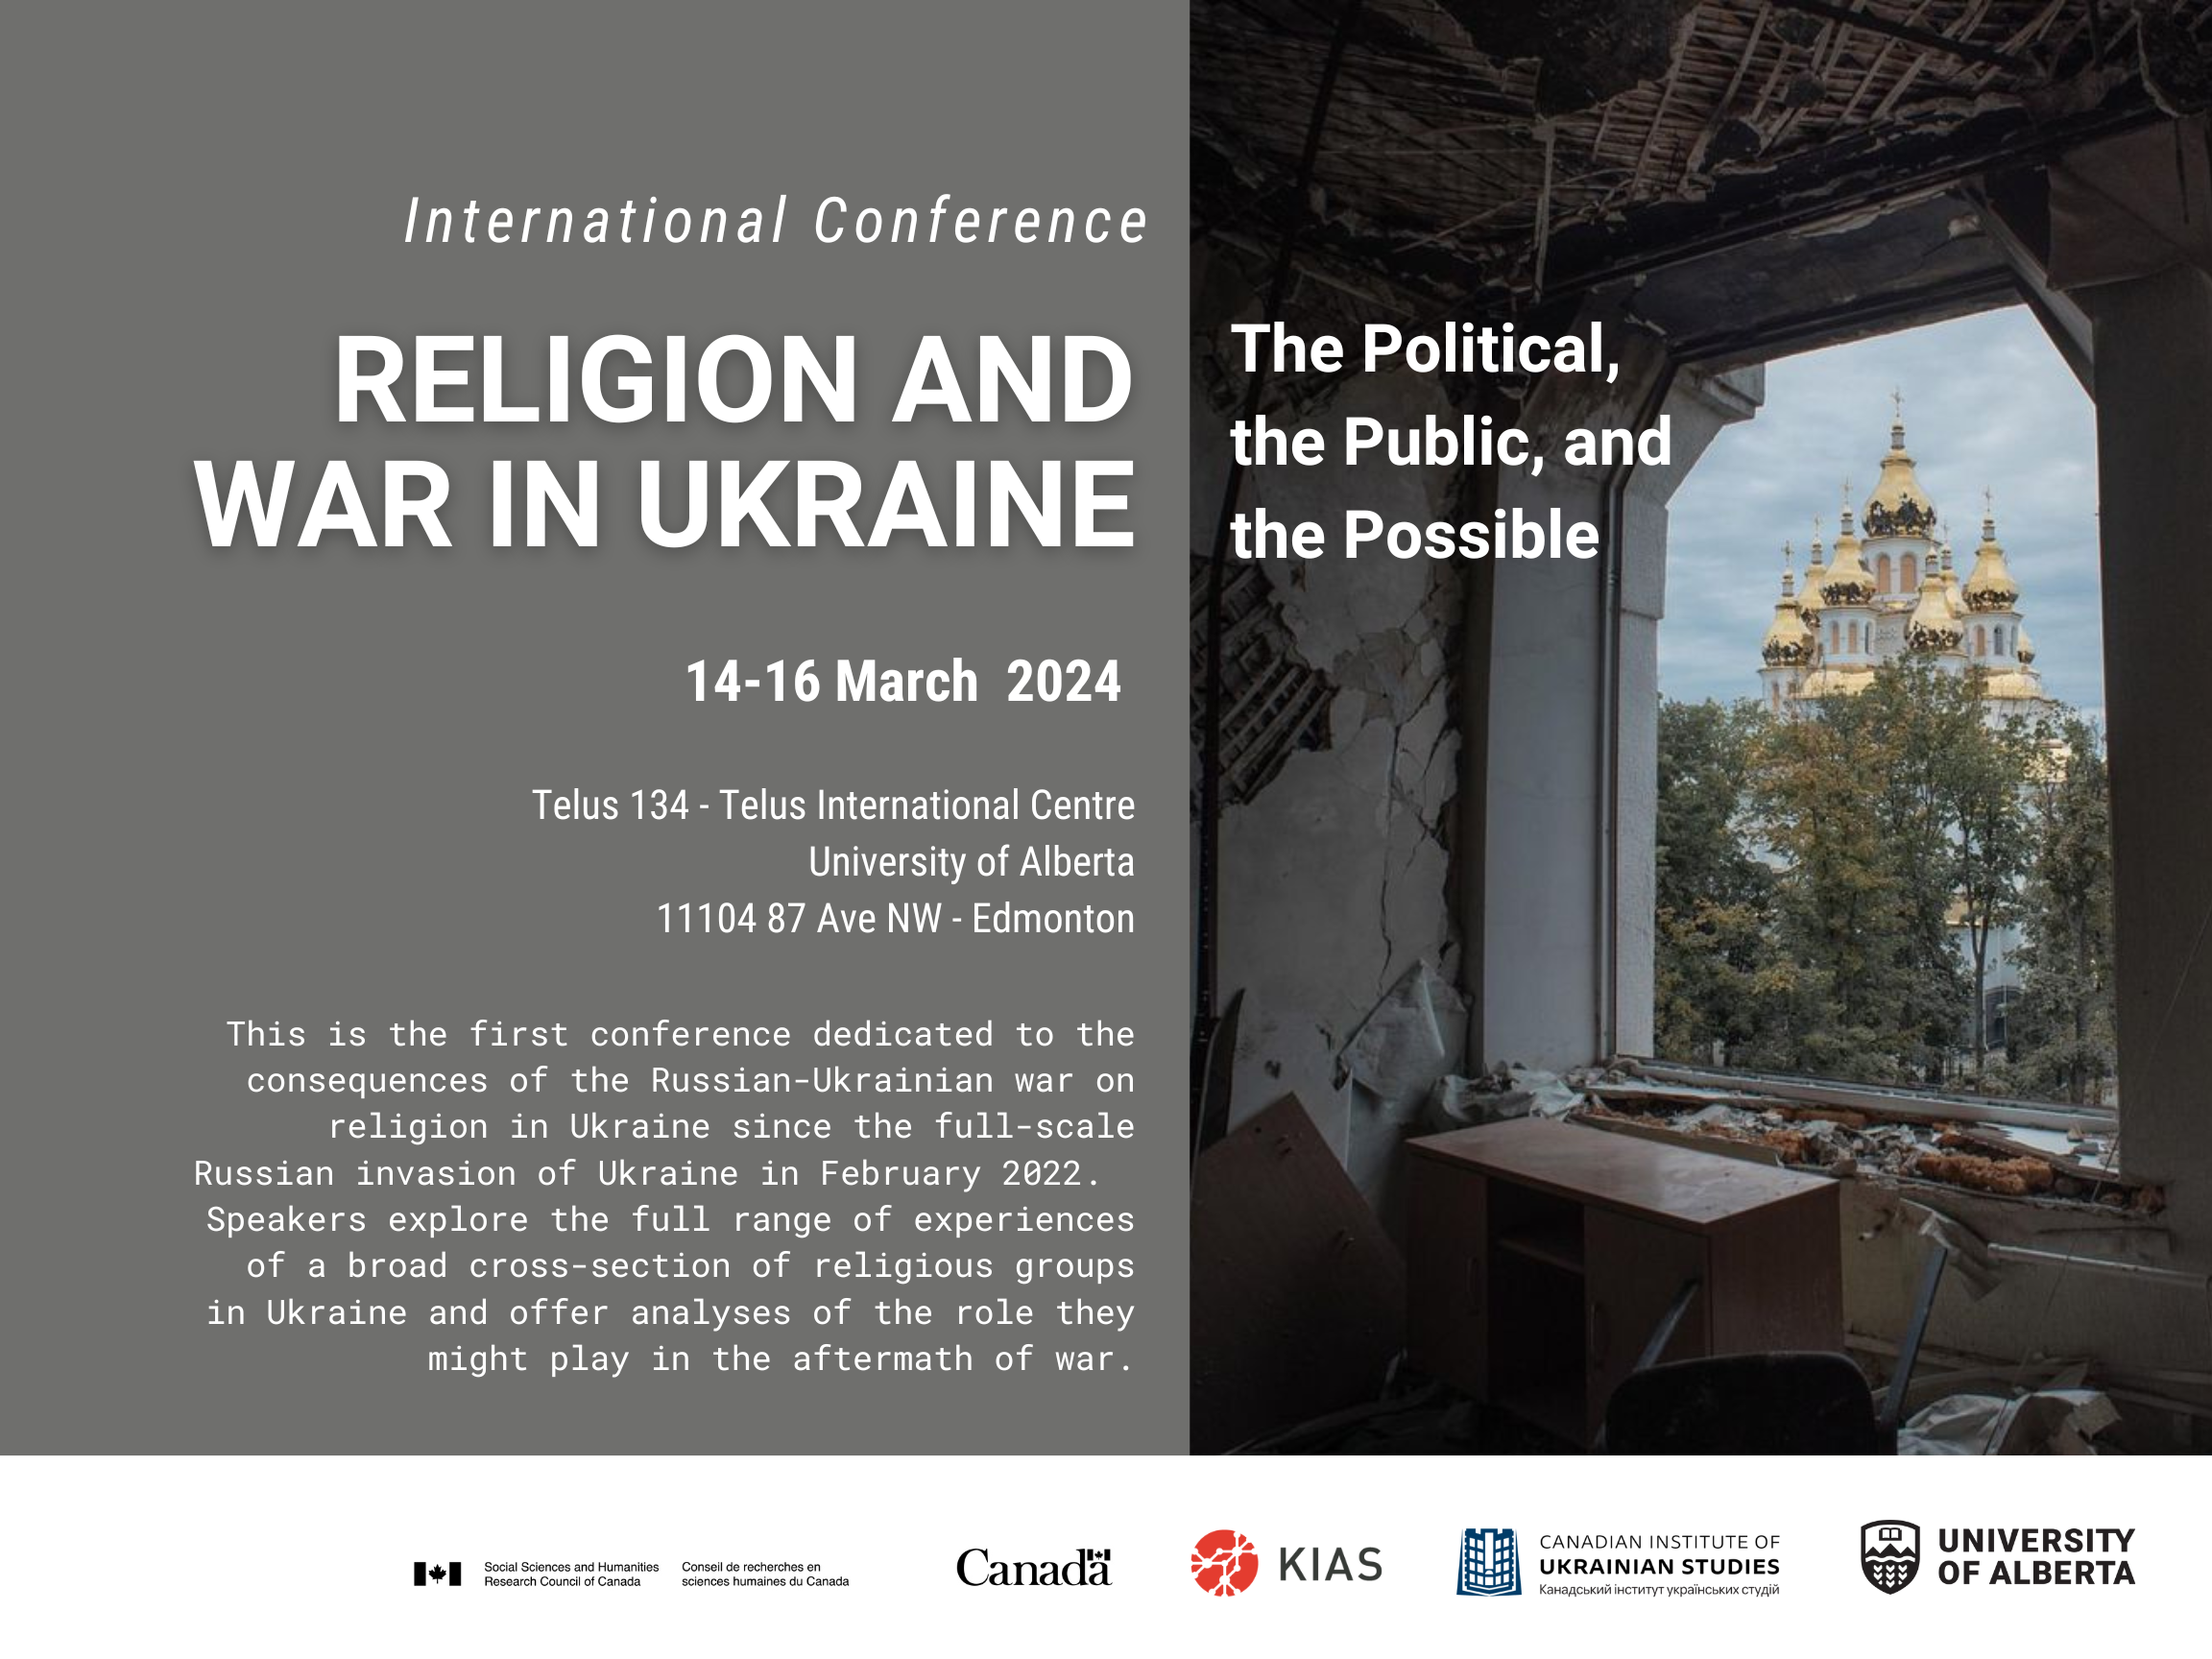 religion-and-war-in-ukraine-the-political-the-public-and-the-possible-is-the-first-conference-dedicated-to-the-consequences-of-the-russian-ukrainian-war-on-religion-in-ukraine-since-the-full-s2.png